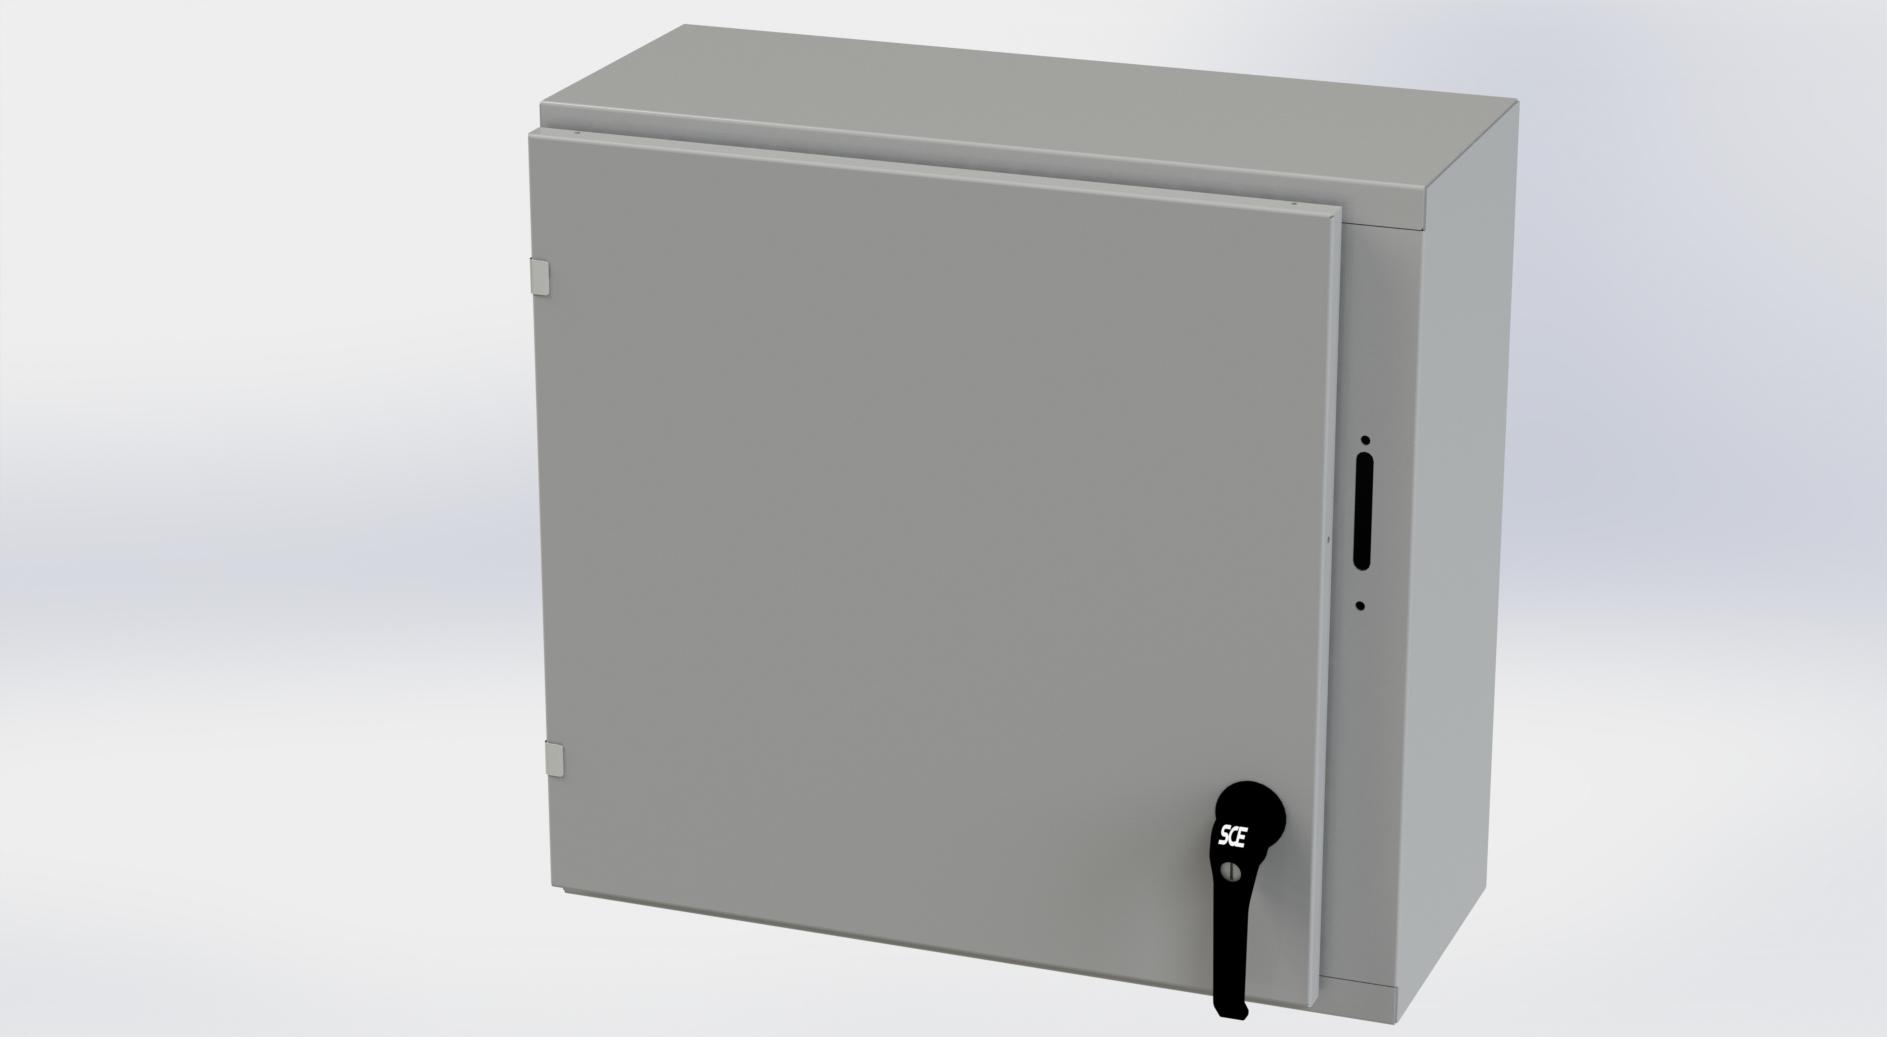 Saginaw Control SCE-24XEL2510LP XEL LP Enclosure, Height:24.00", Width:25.38", Depth:10.00", ANSI-61 gray powder coating inside and out. Optional sub-panels are powder coated white.